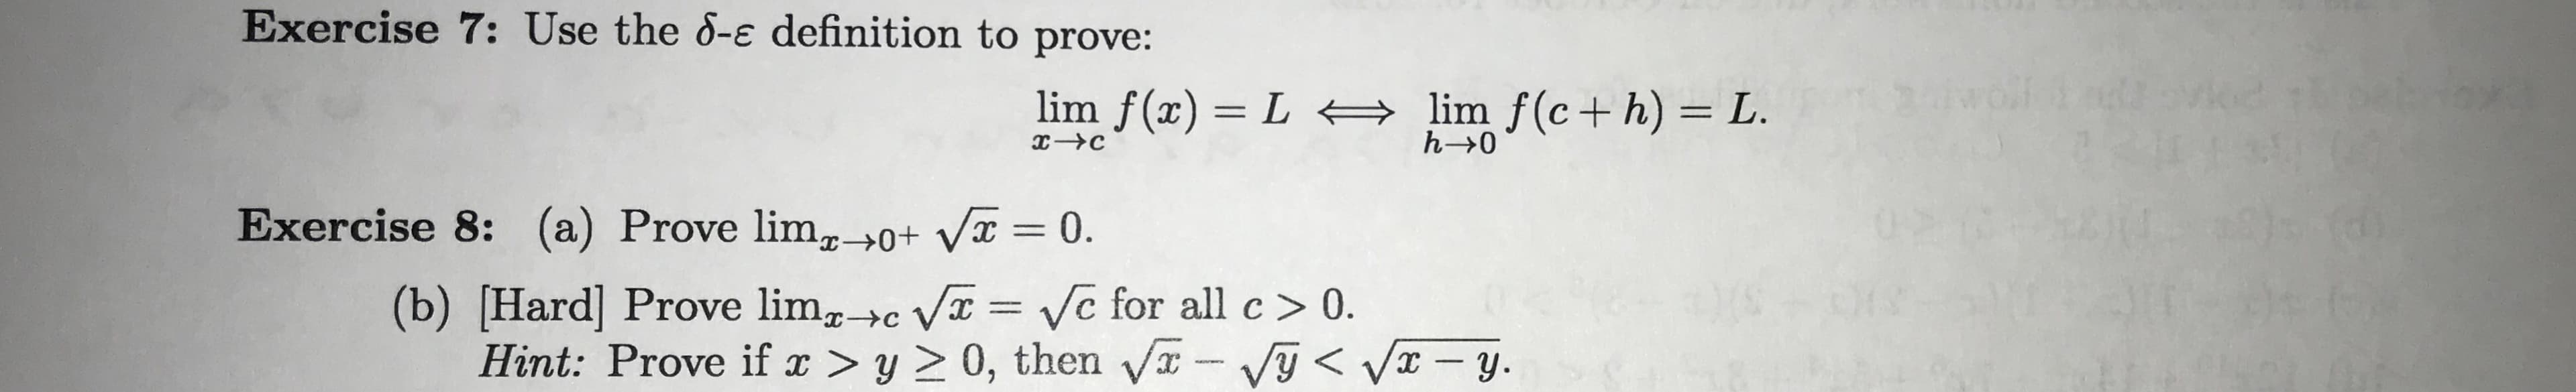 Exercise 7: Use the 8-e definition to prove:
lim f(x) L
lim f(c+ h) L.
h- 0
Exercise 8: (a) Prove lim_0+ Vx = 0.
(b) [Hard] Prove limc V Ve for all c> 0
Hint: Prove if ax > y > 0, then VVy<Vy
